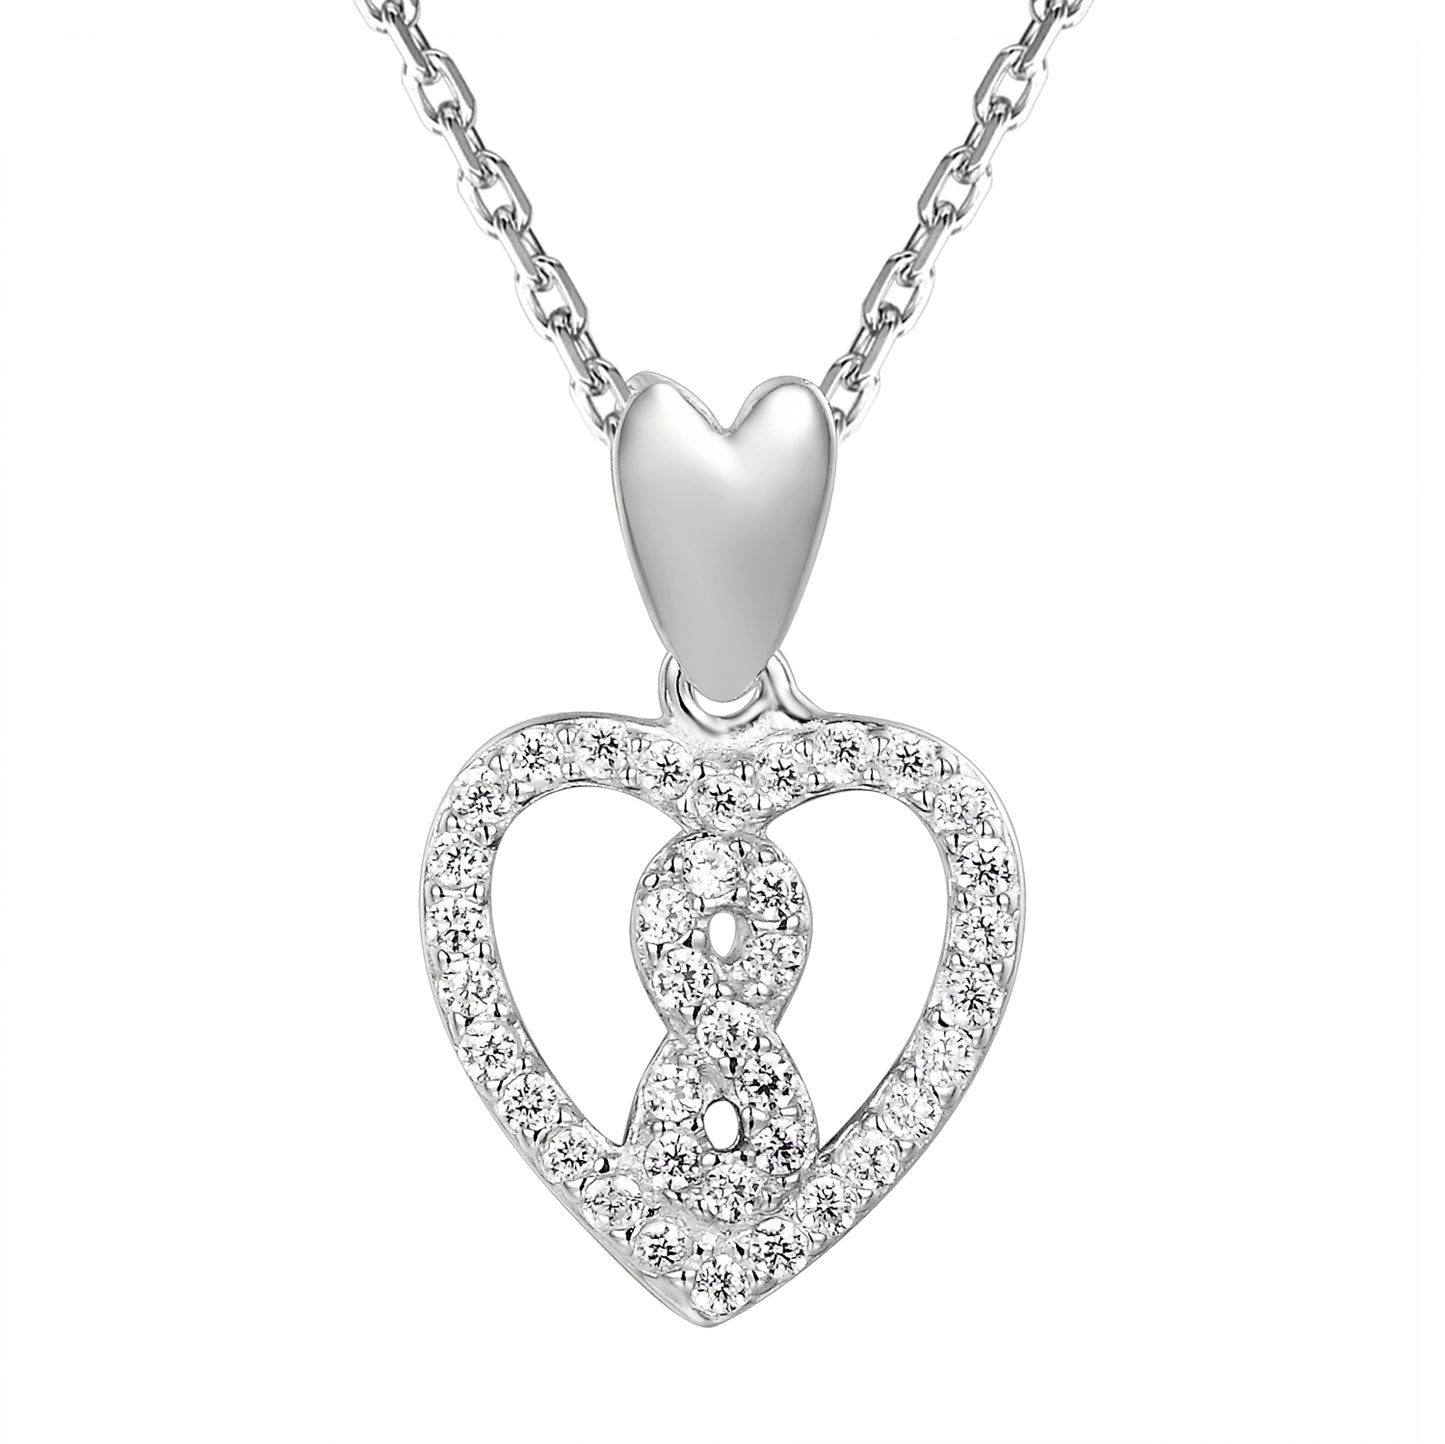 Sterling Silver Infinity Symbol Solitaire Heart Pendant Valentine's